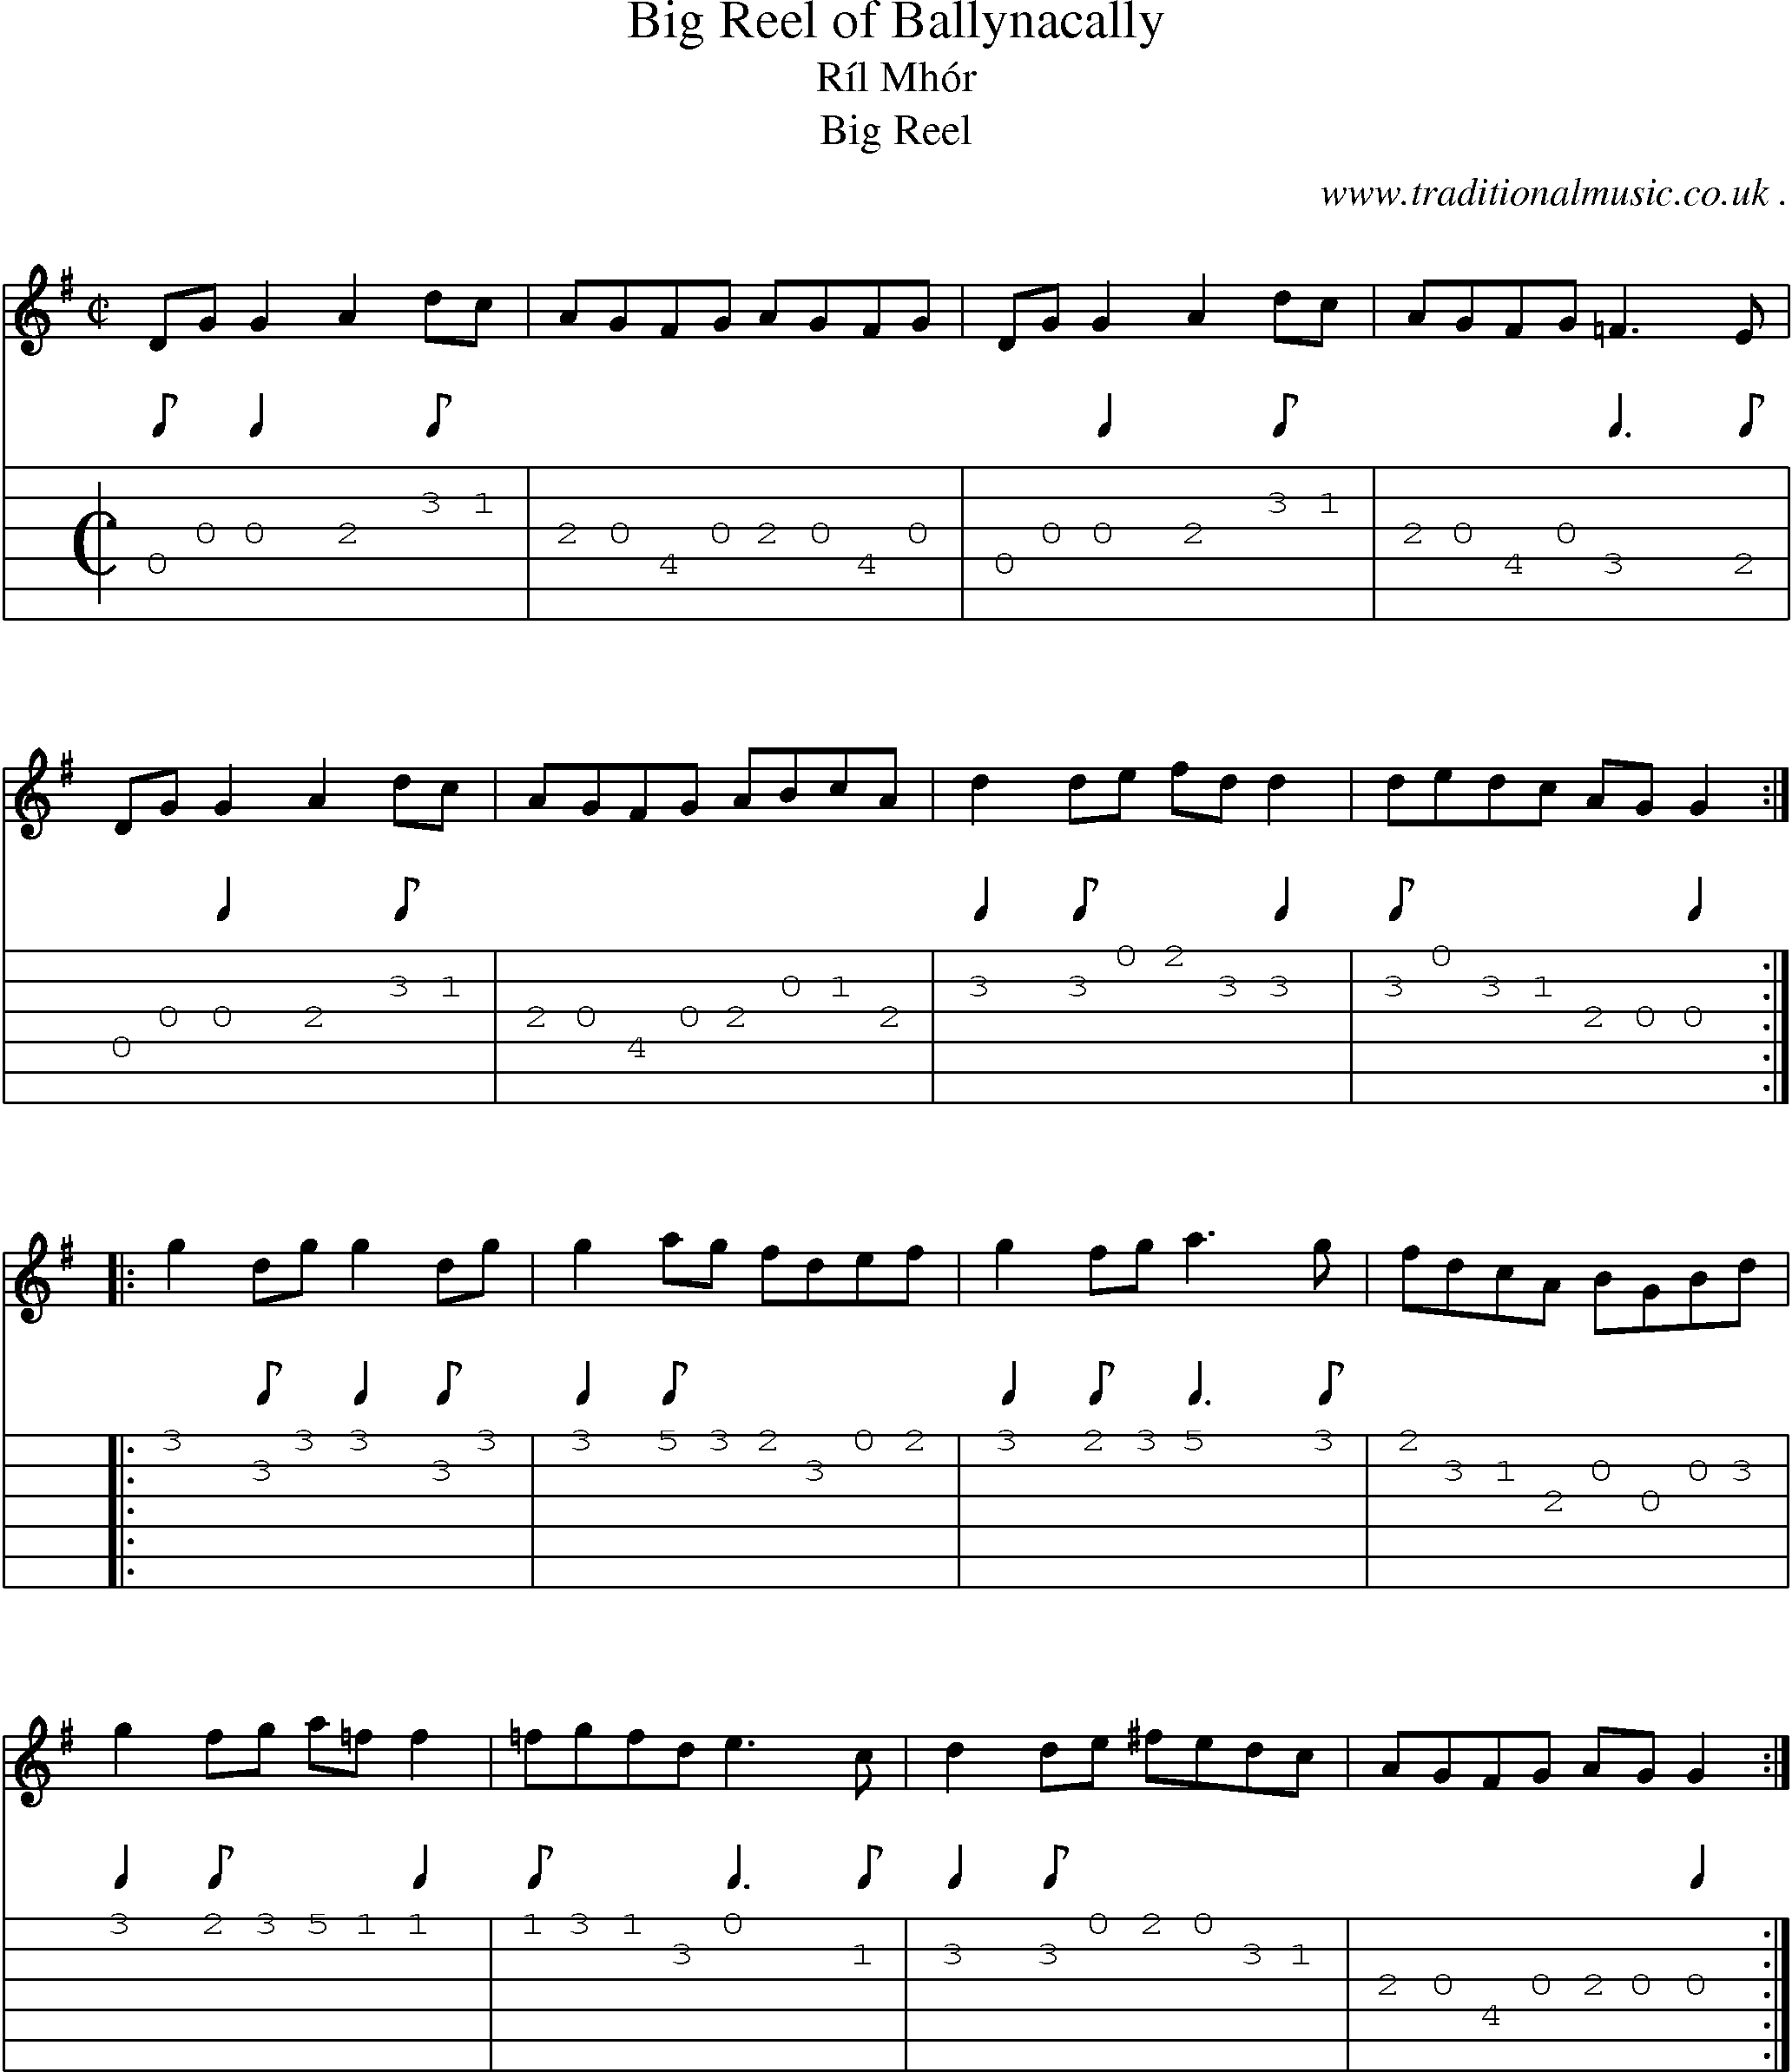 Sheet-Music and Guitar Tabs for Big Reel Of Ballynacally